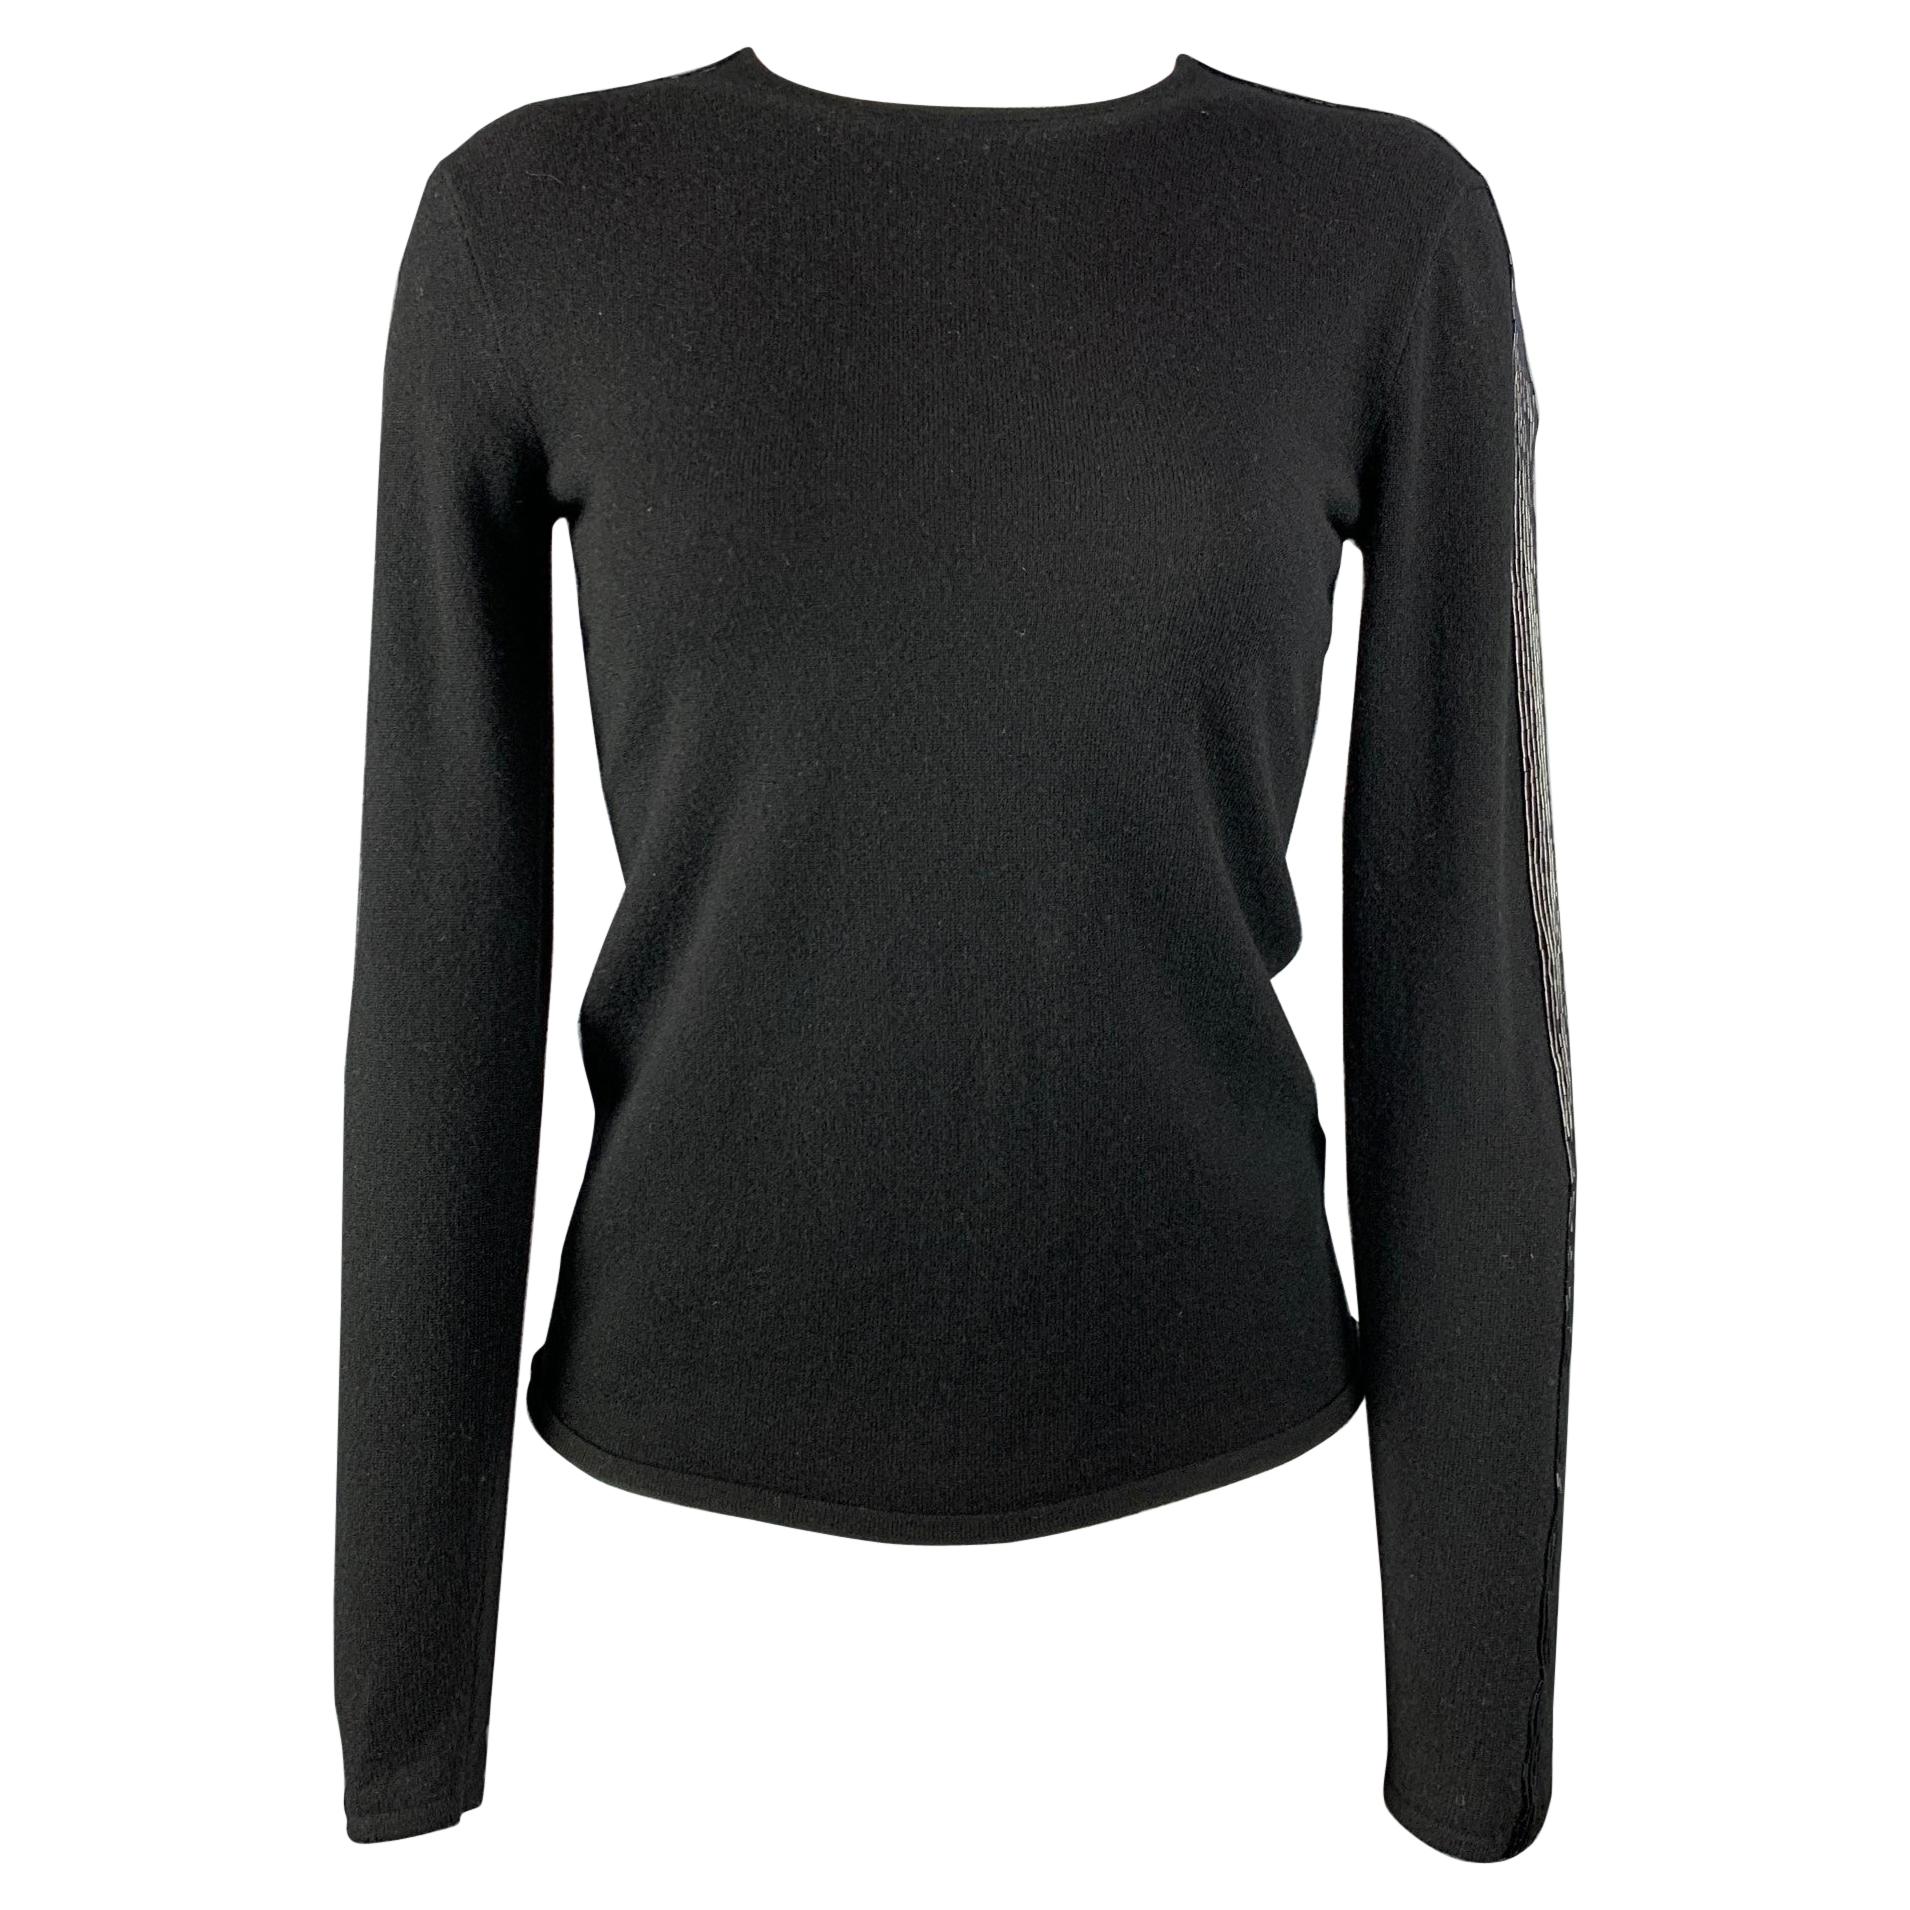 RALPH LAUREN Black Label Size S Black Knitted Cashmere Sequined Pullover